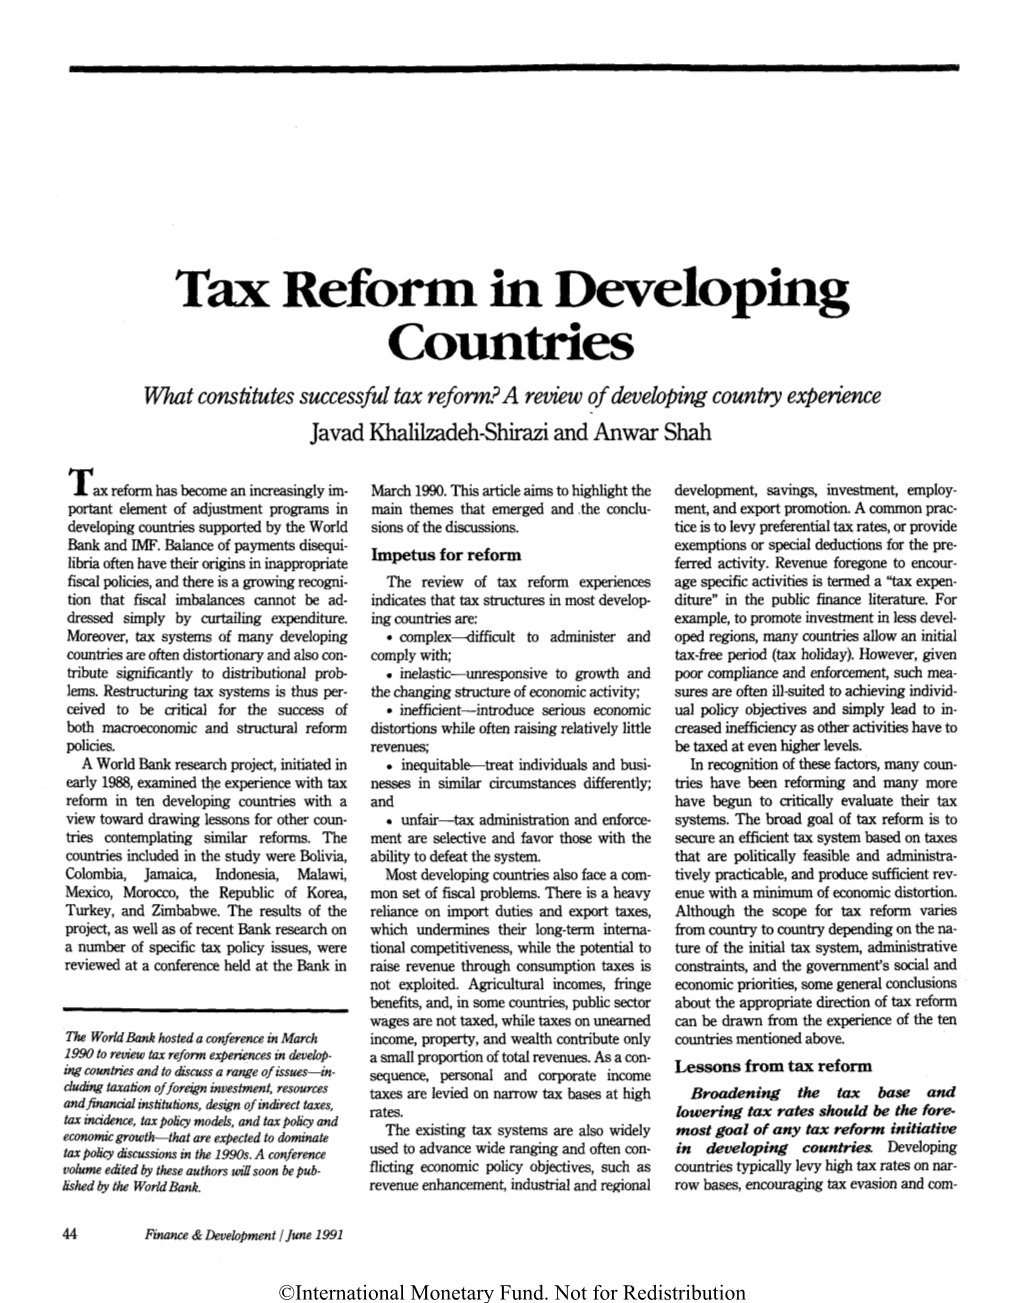 Tax Reform in Developing Countries What Constitutes Successful Tax Reform? a Review of Developing Country Experience Javad Khalilzadeh-Shirazi and Anwar Shah